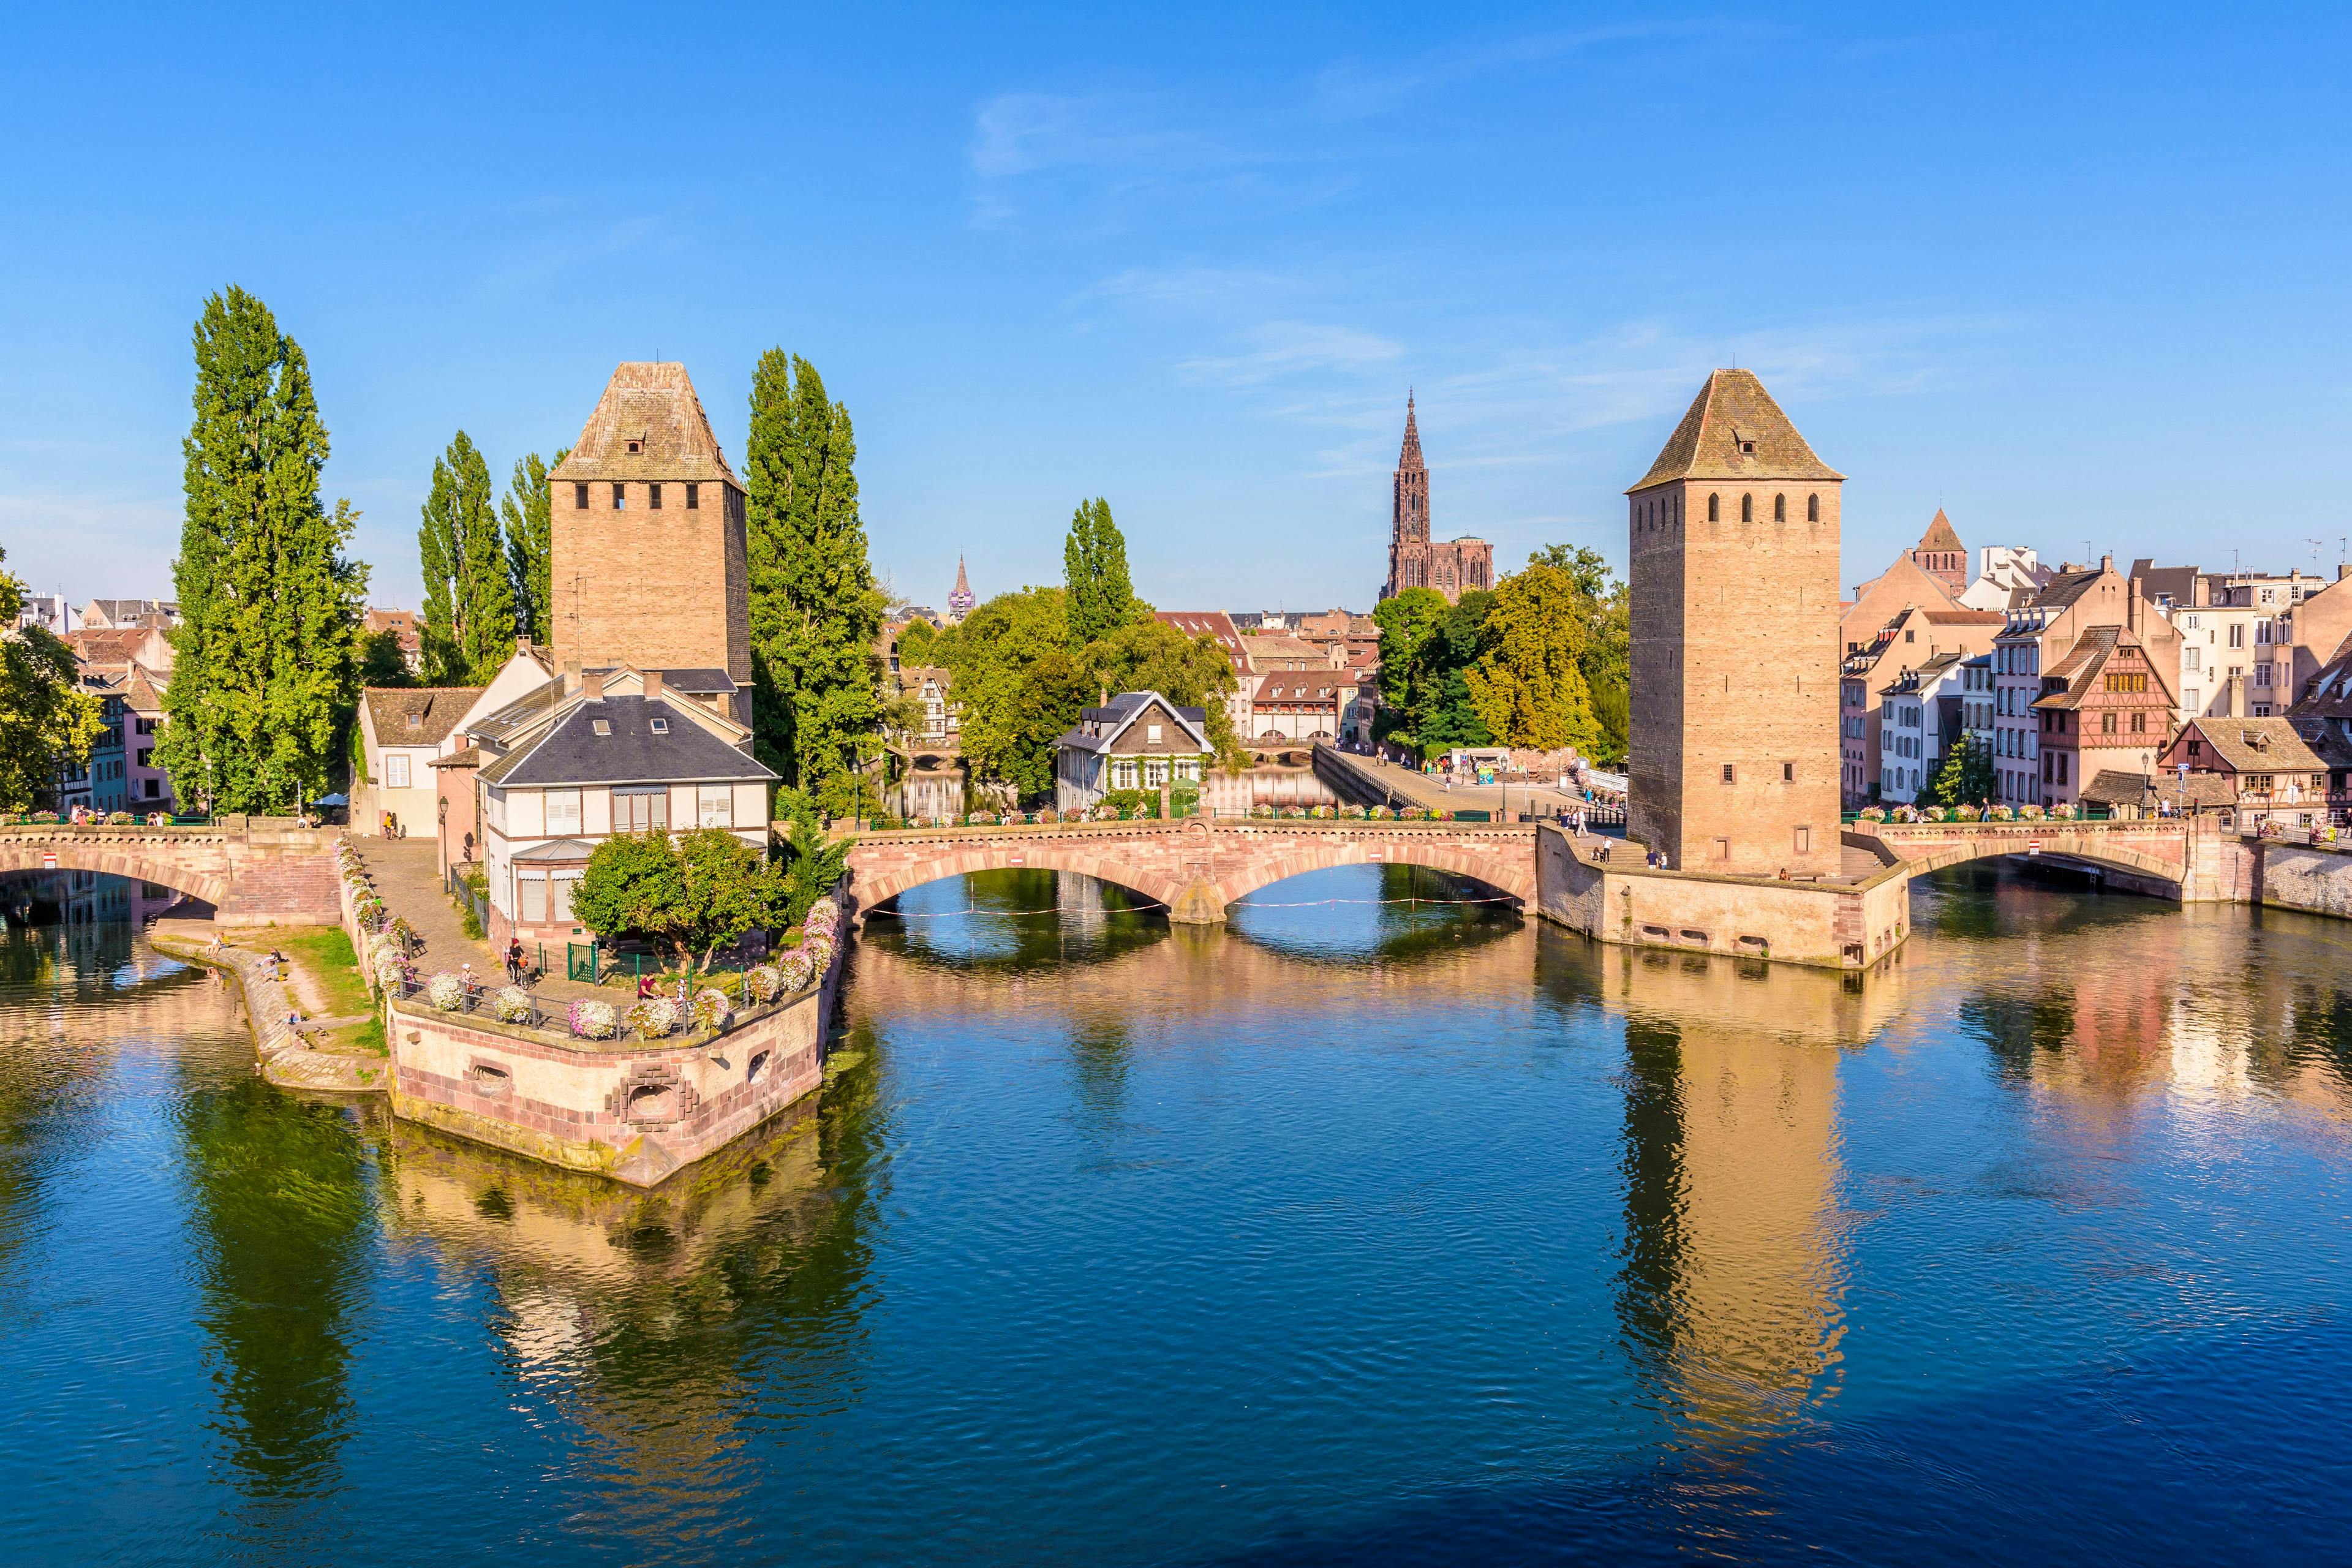 Visit Strasbourg: From Petite France to European Parliament - The Covered Bridges - ratepunk